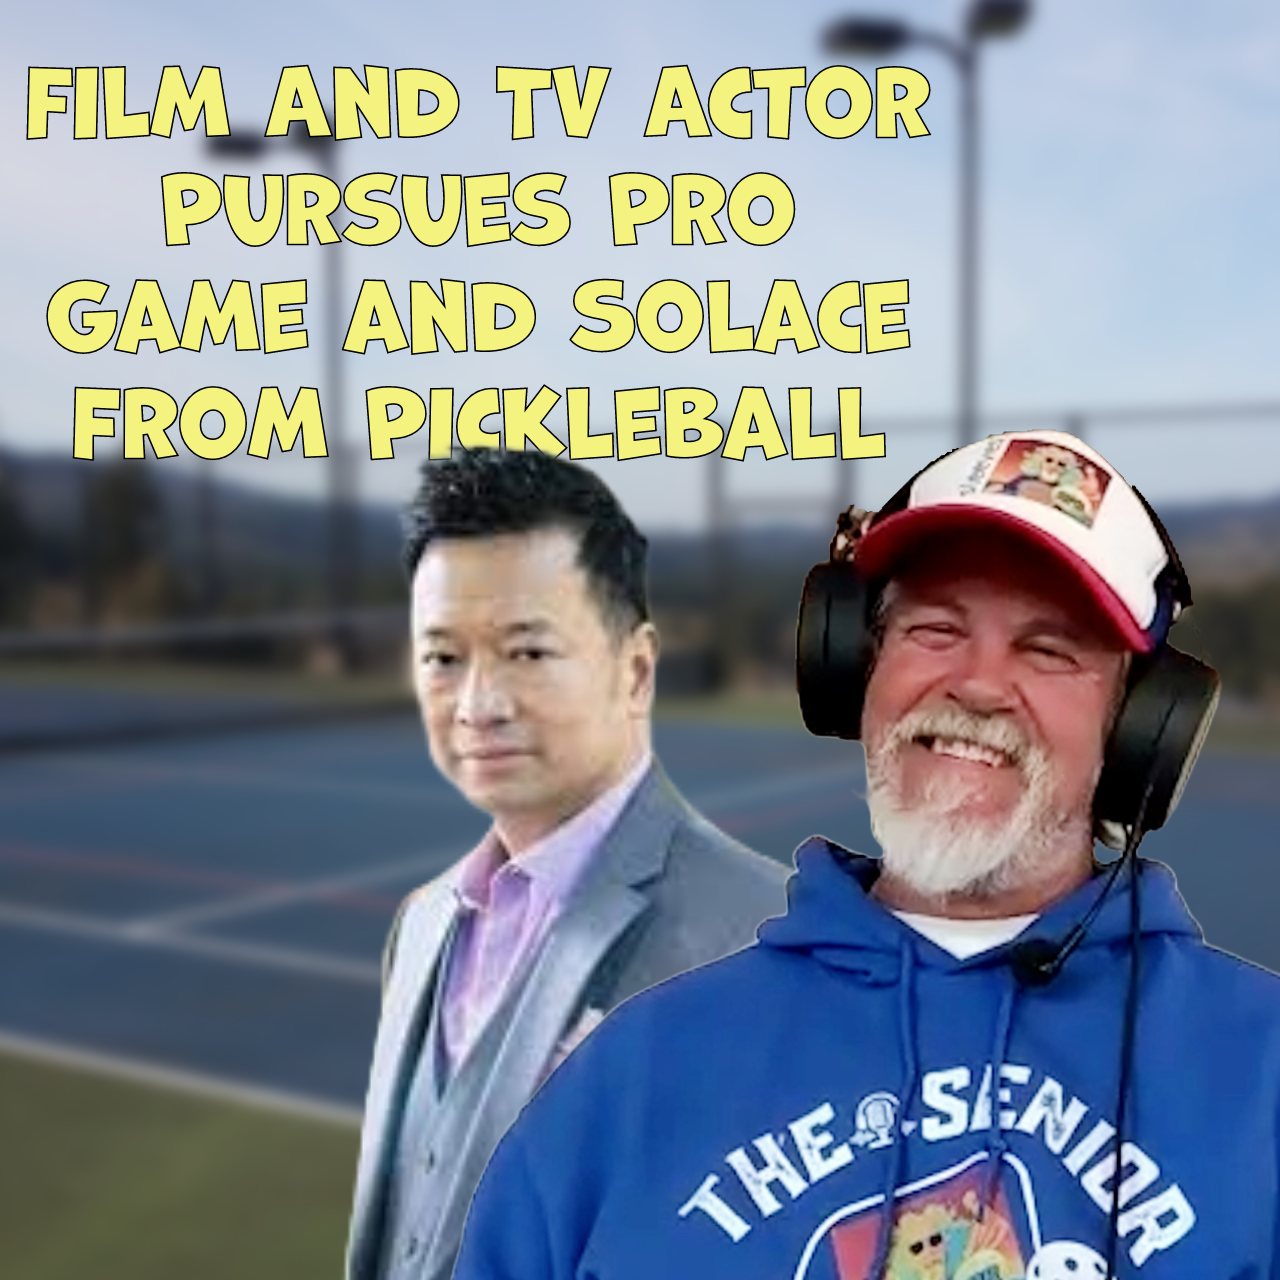 Michael Tow Interview: Pickleball Journey & 'City on Fire' Role